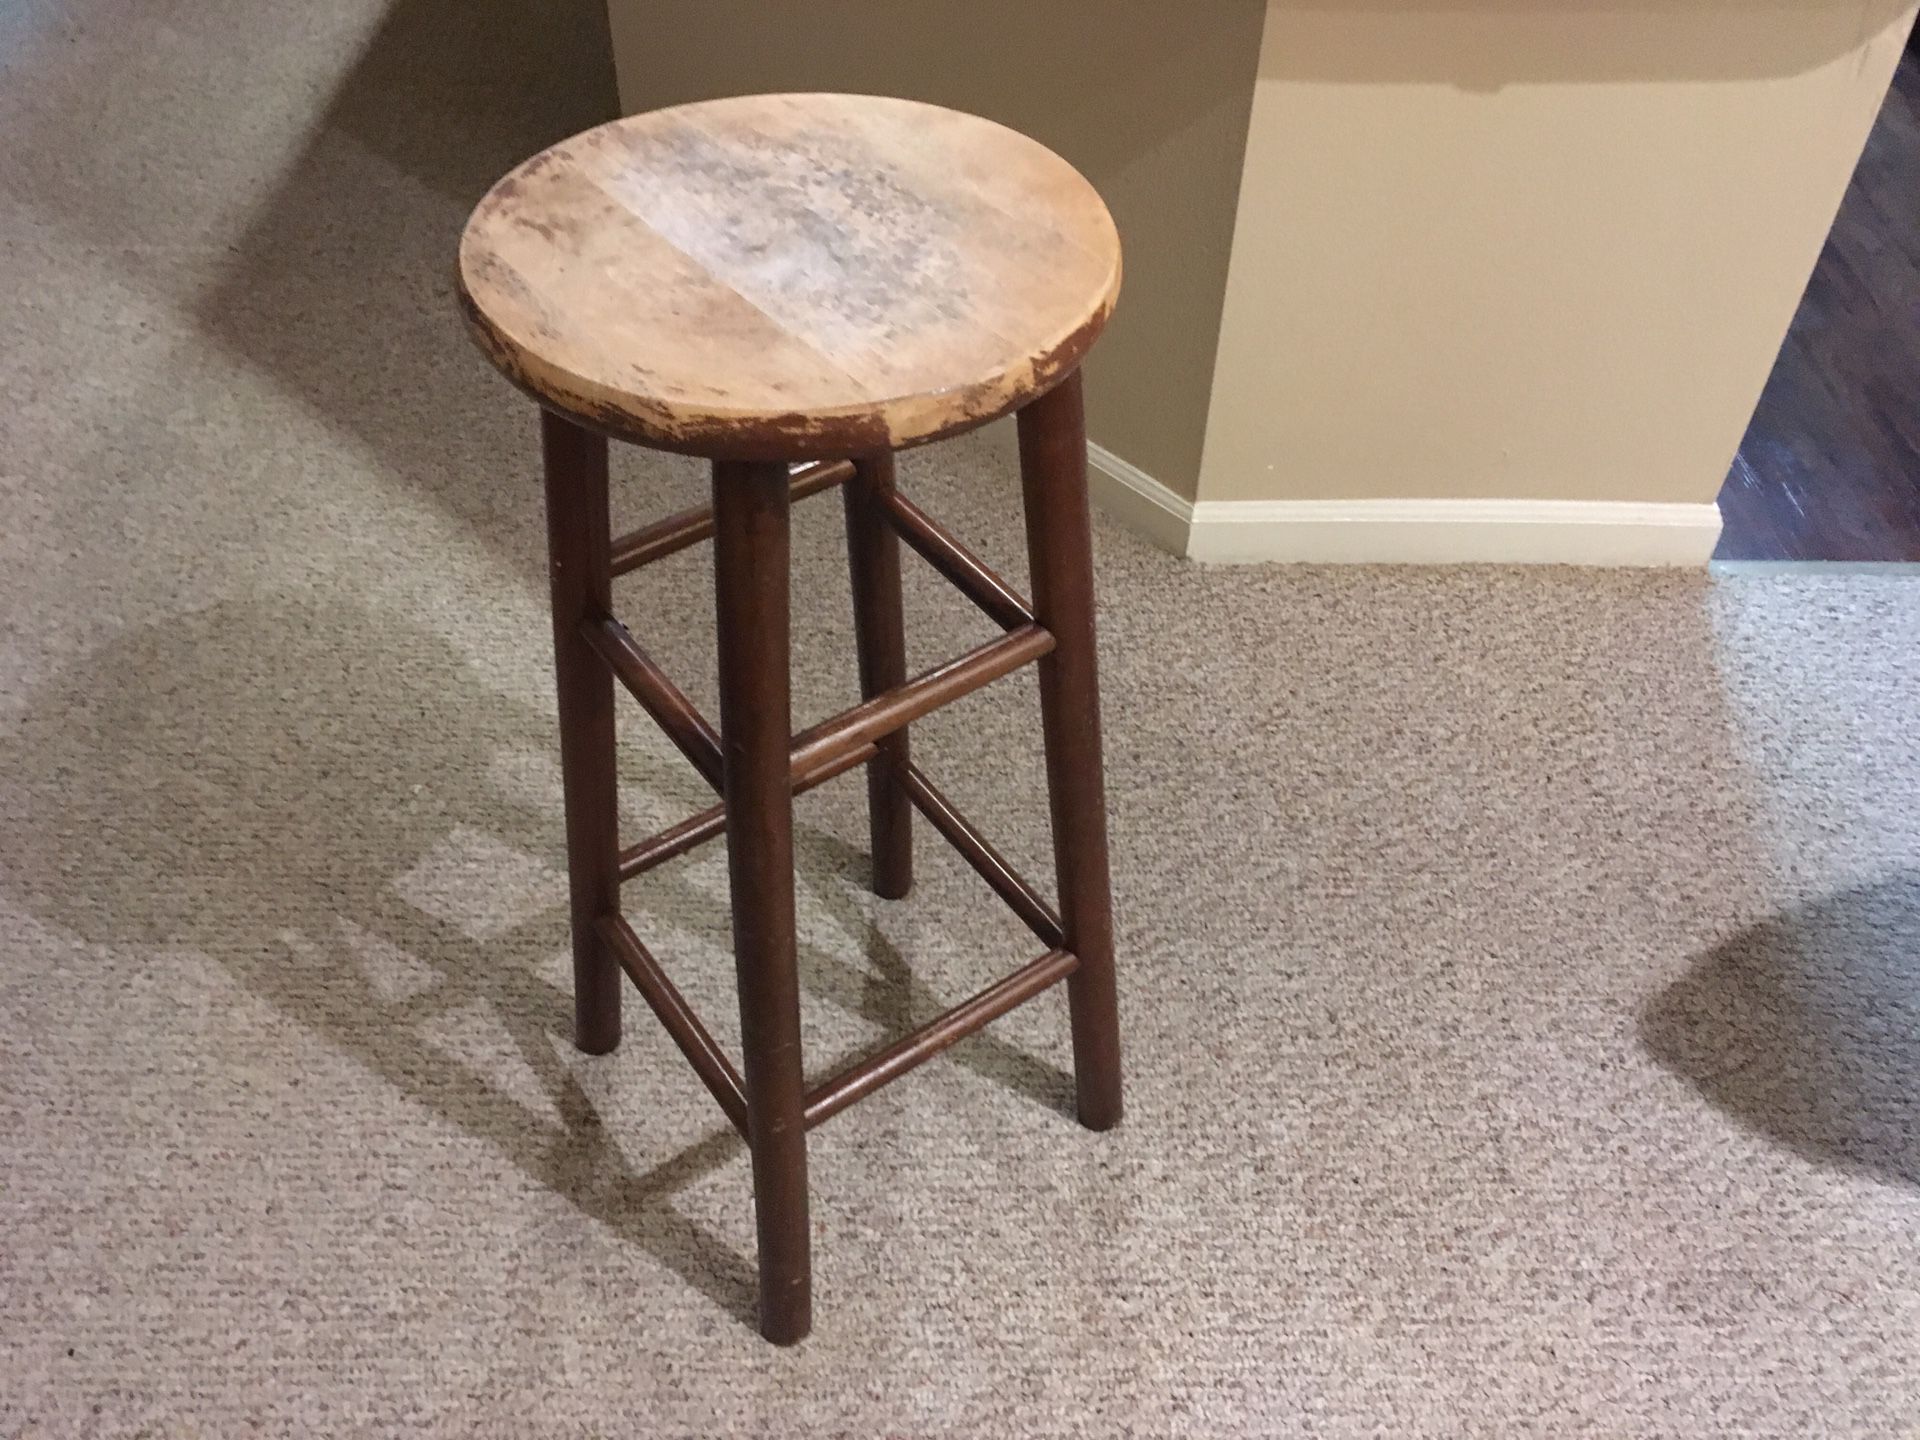 Wooden Stool for Sale